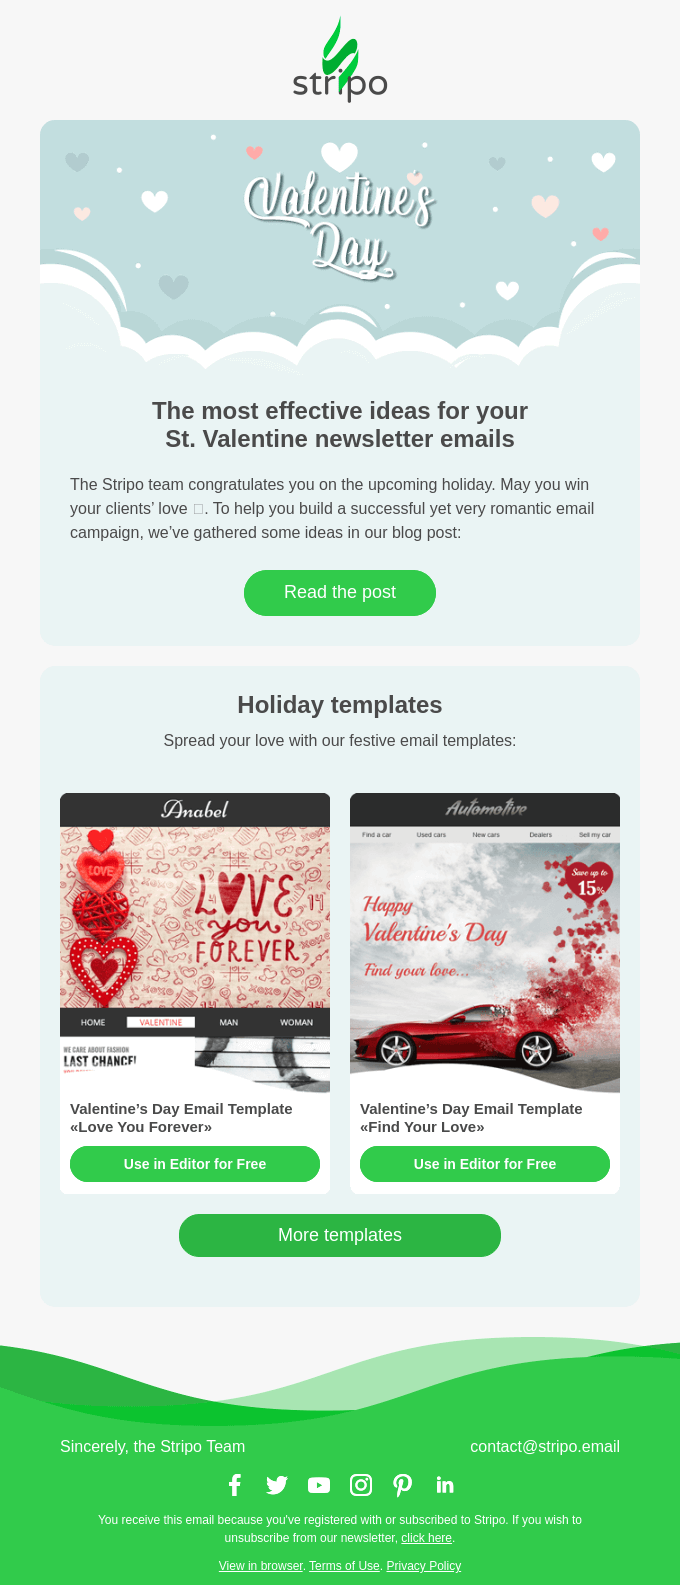 💌 Your secret Valentine with holiday newsletter ideas